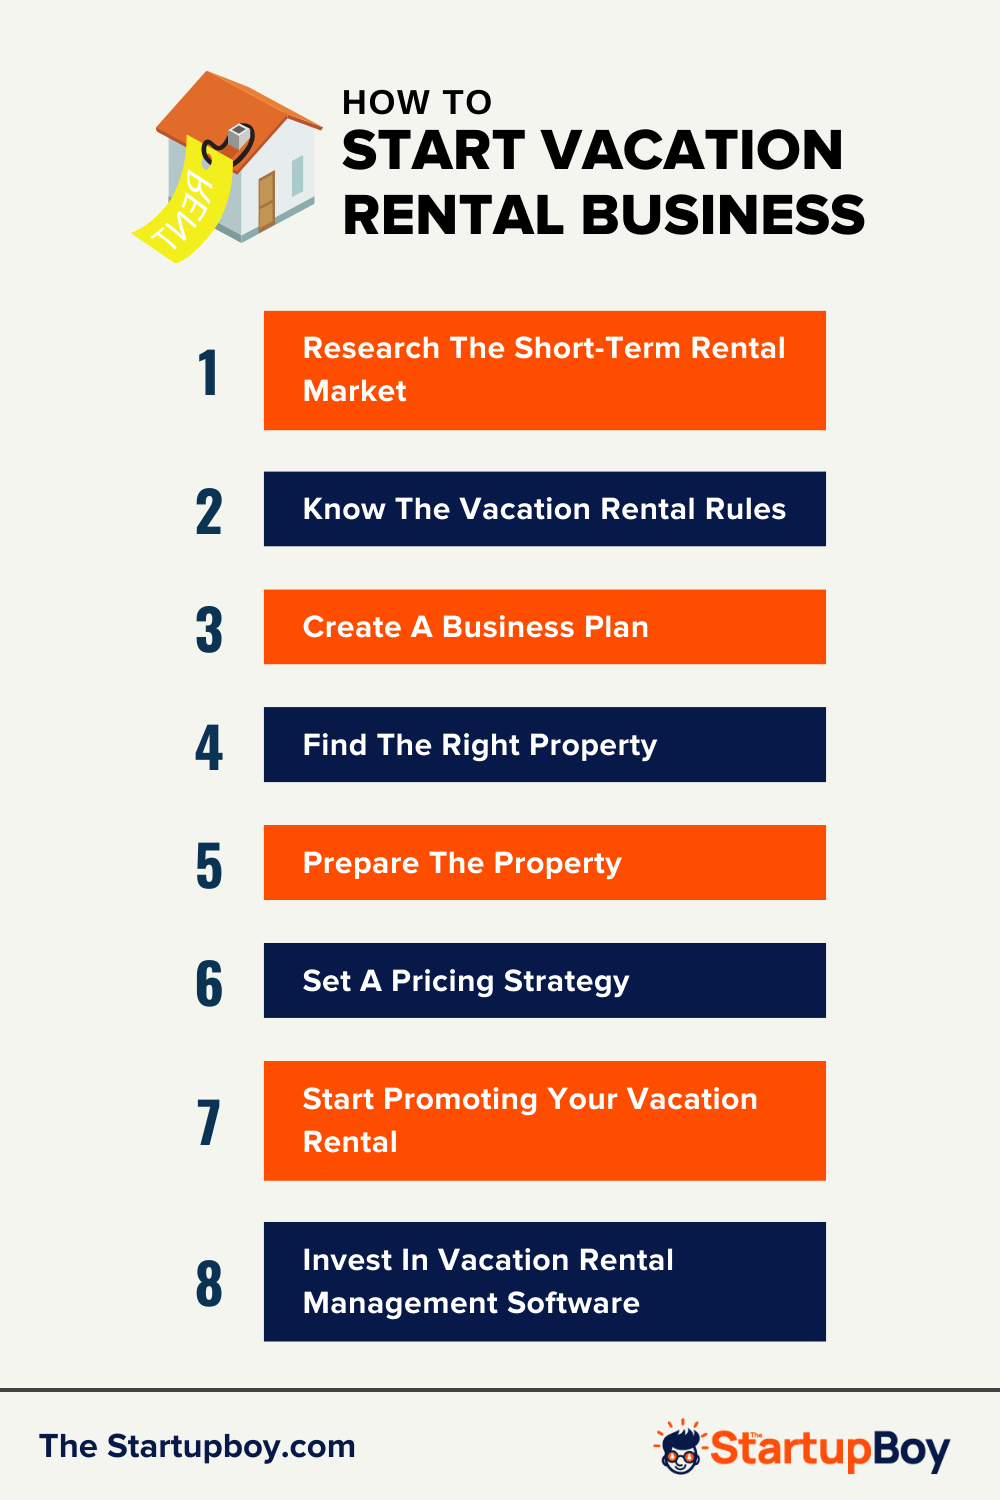 How To Start Vacation Rental Business